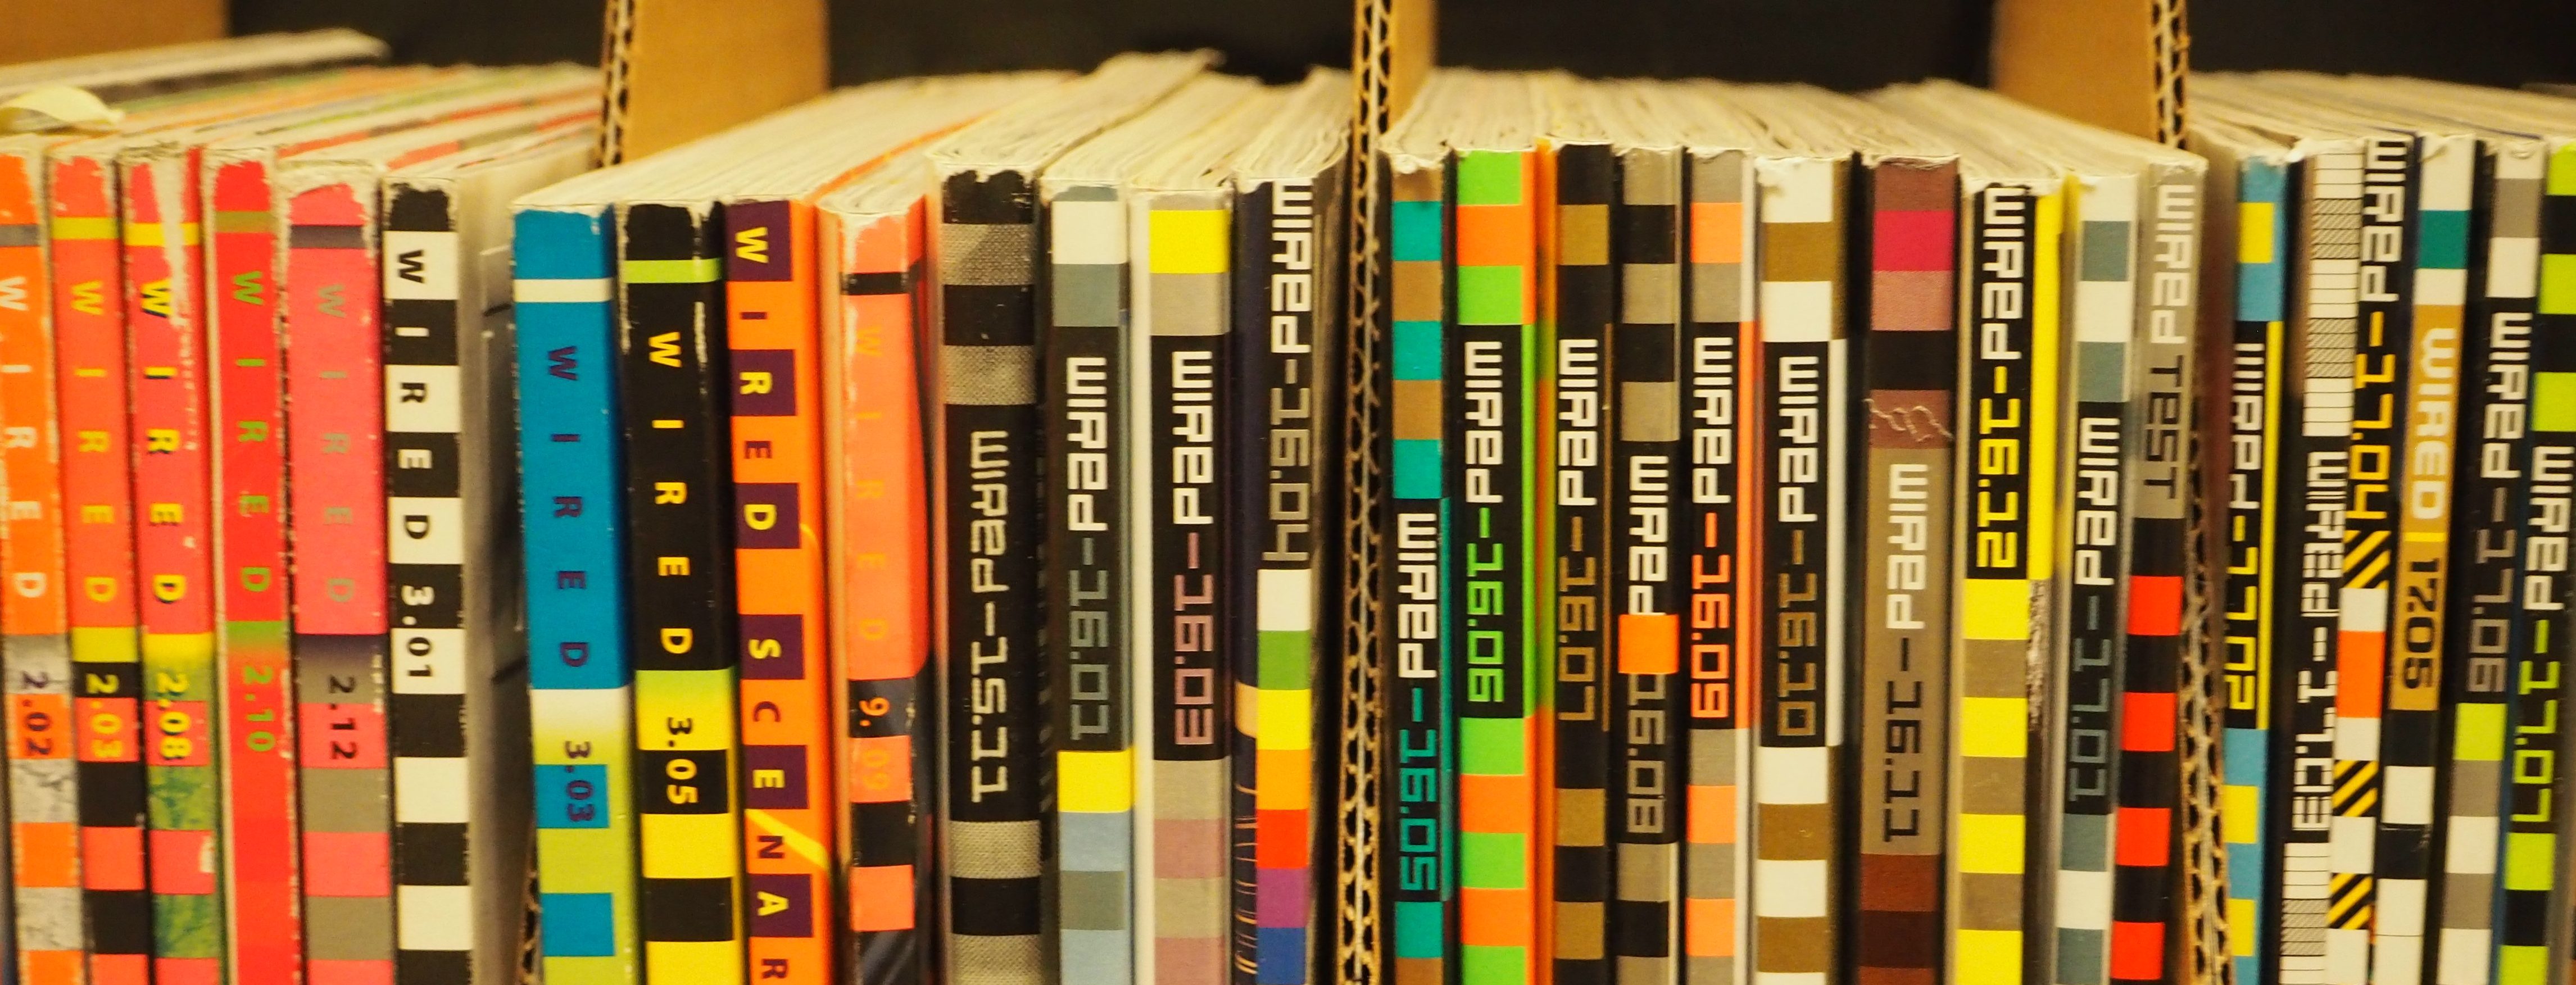 old wired magazine spines